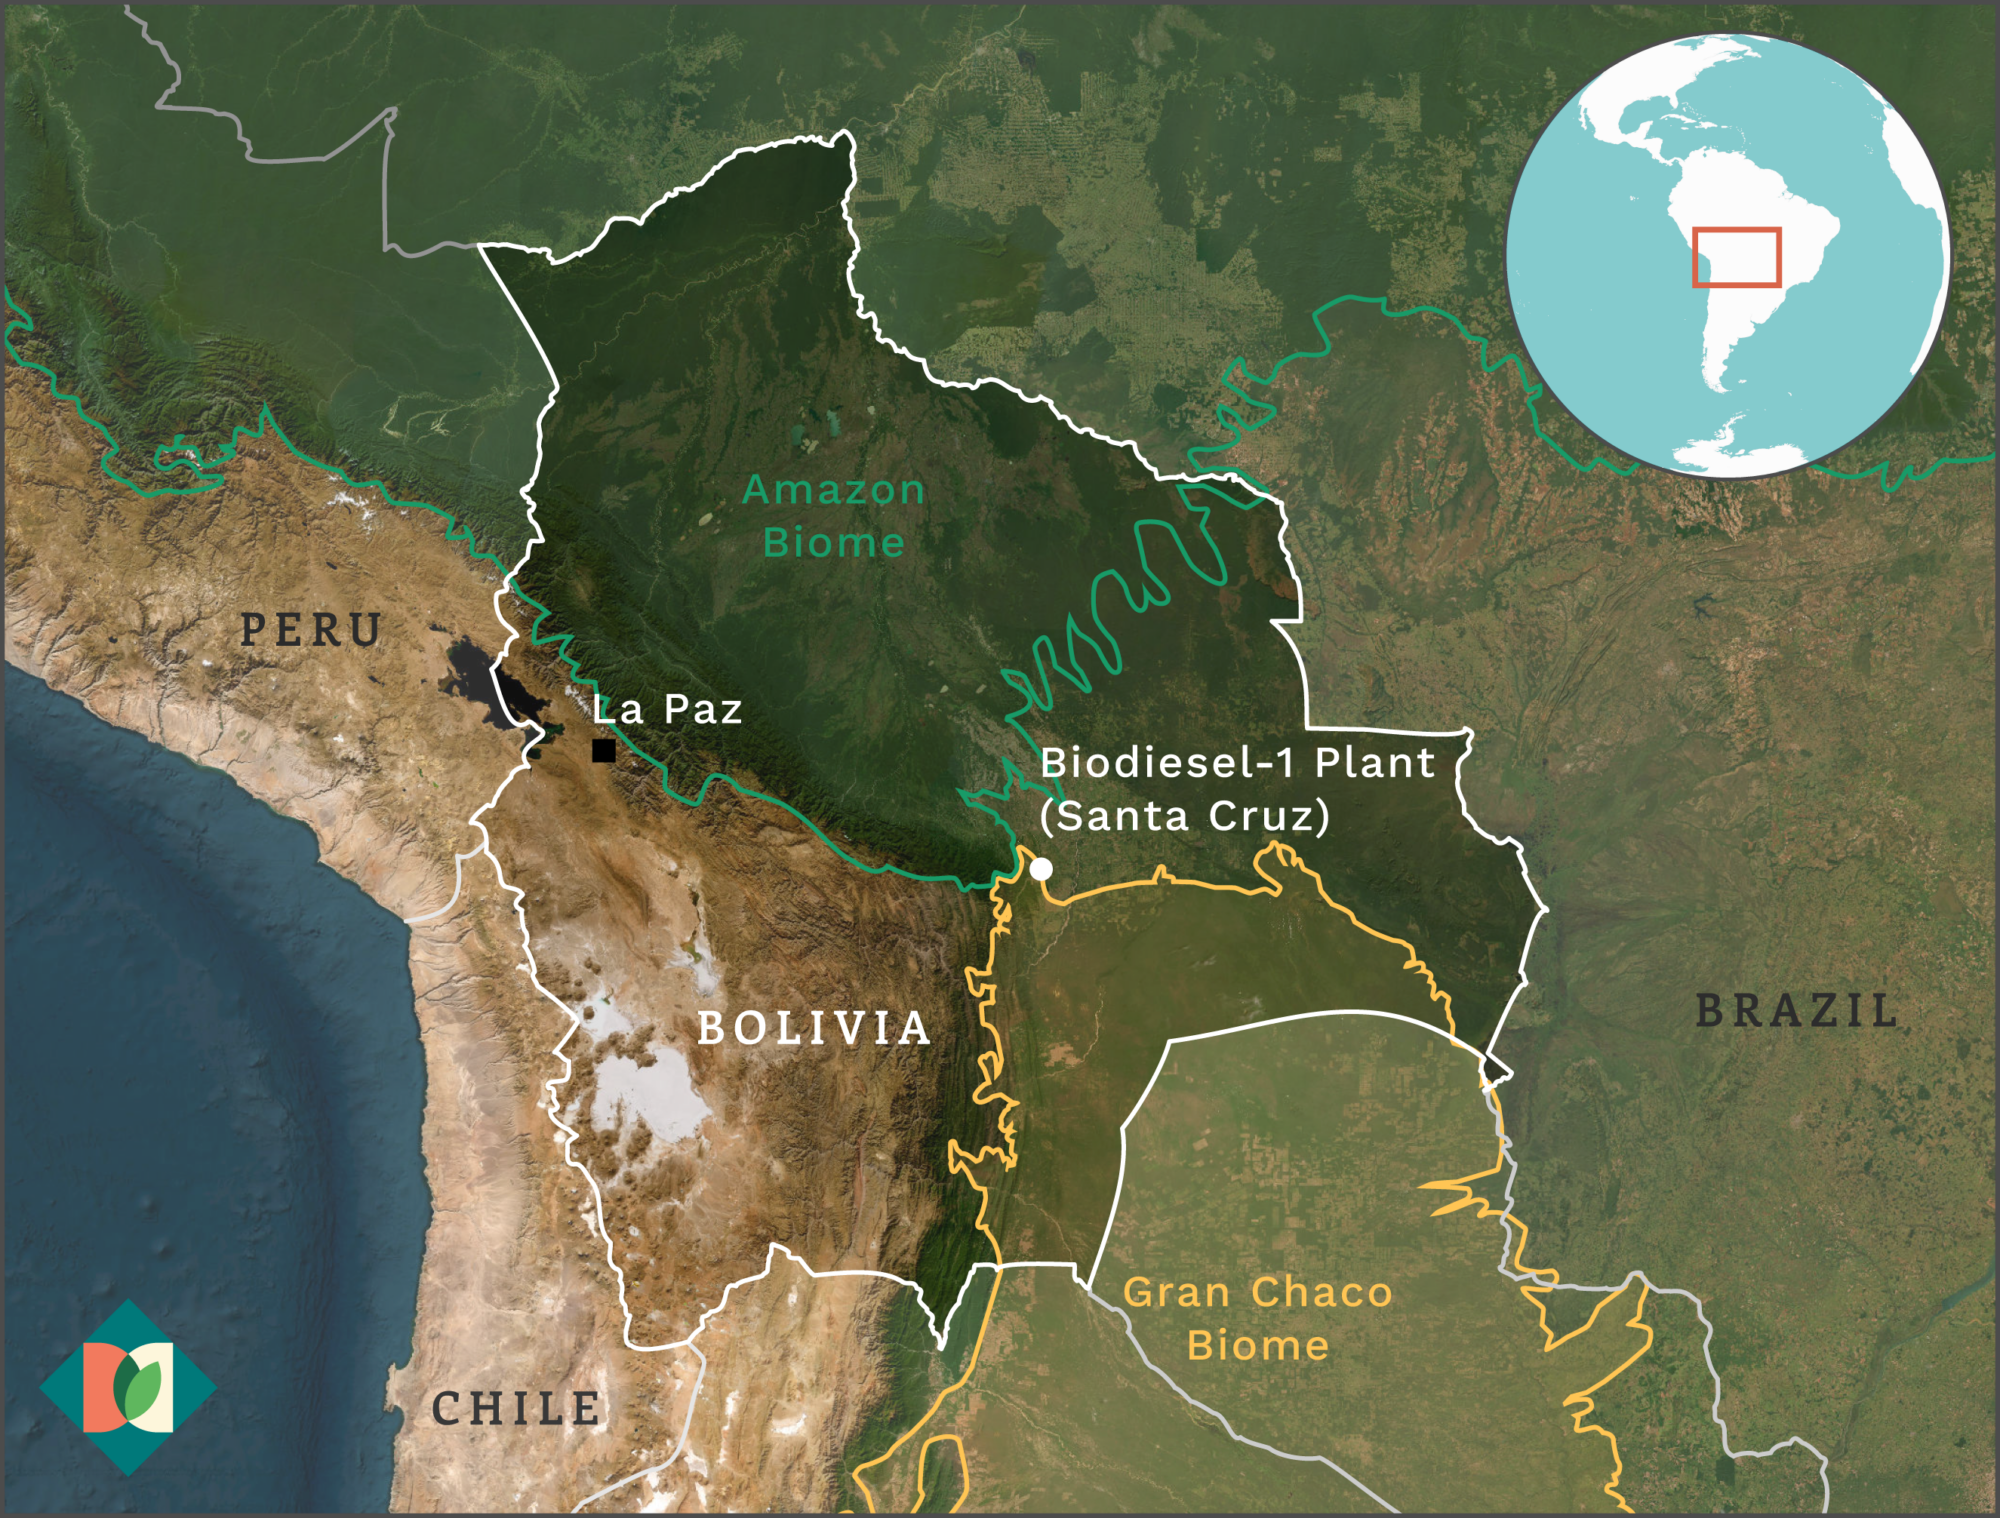 Map showing the location of the future biodiesel plant in Bolivia, and the Amazon and Gran Chaco.